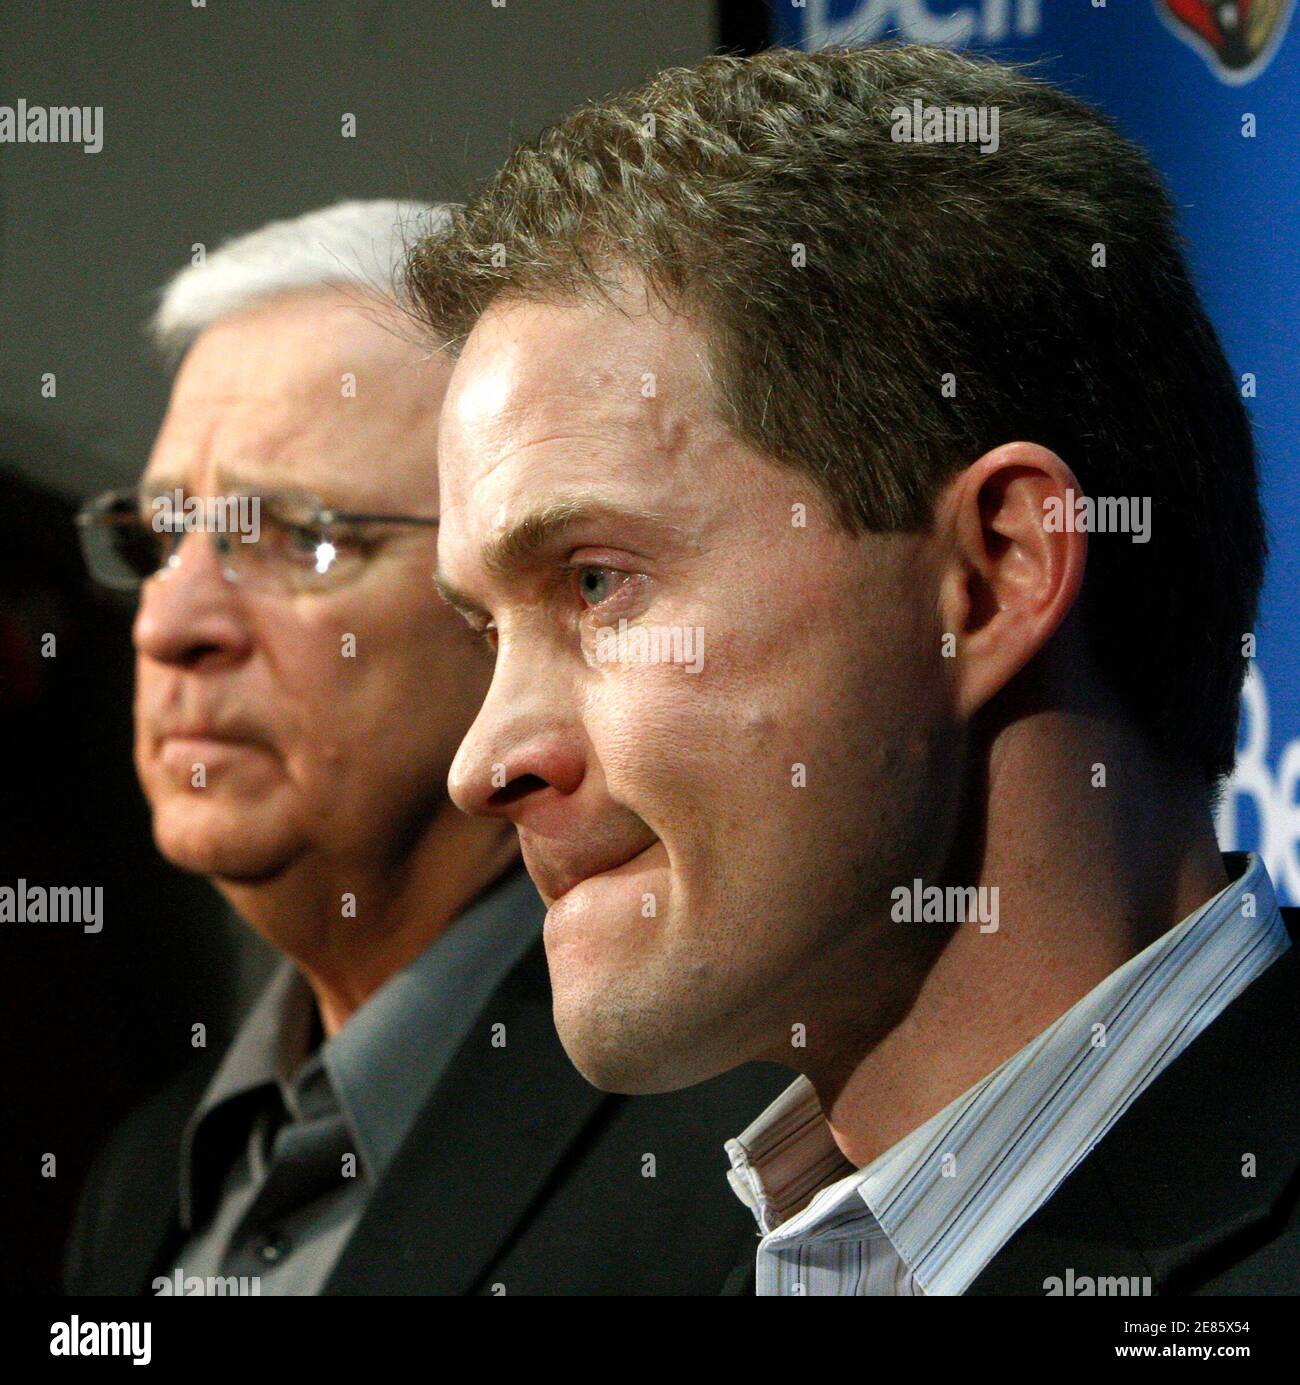 NHL ice hockey team Ottawa Senators' new head coach Cory Clouston (R) and general manager Bryan Murray take part in a news conference in Ottawa February 2, 2009. Clouston replaced Craig Hartsburg, who was fired after less than eight months in the job.       REUTERS/Chris Wattie       (CANADA) Stock Photo